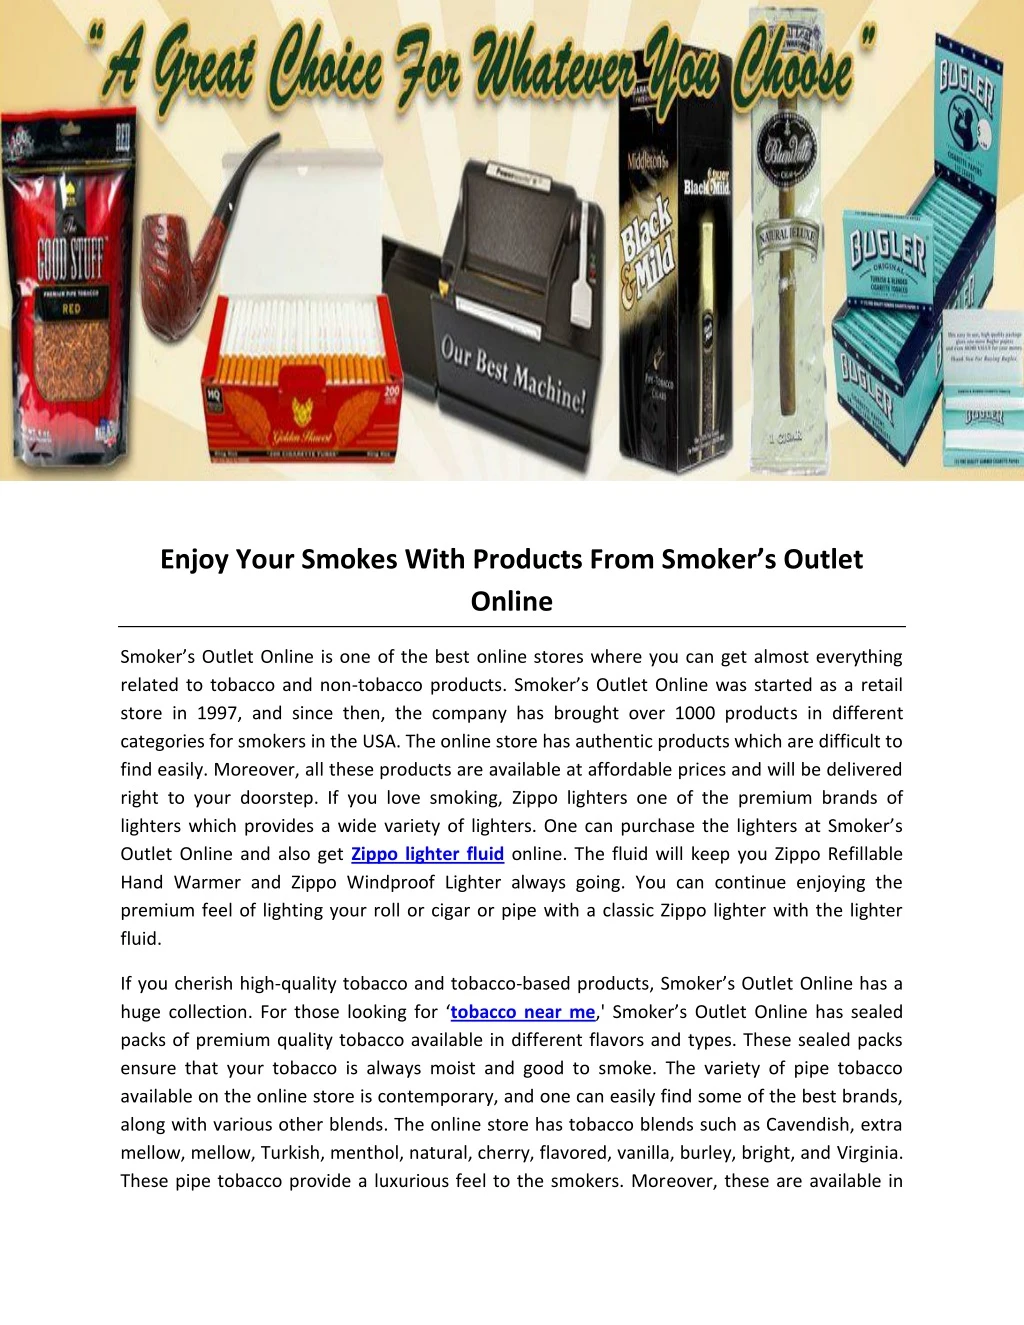 enjoy your smokes with products from smoker